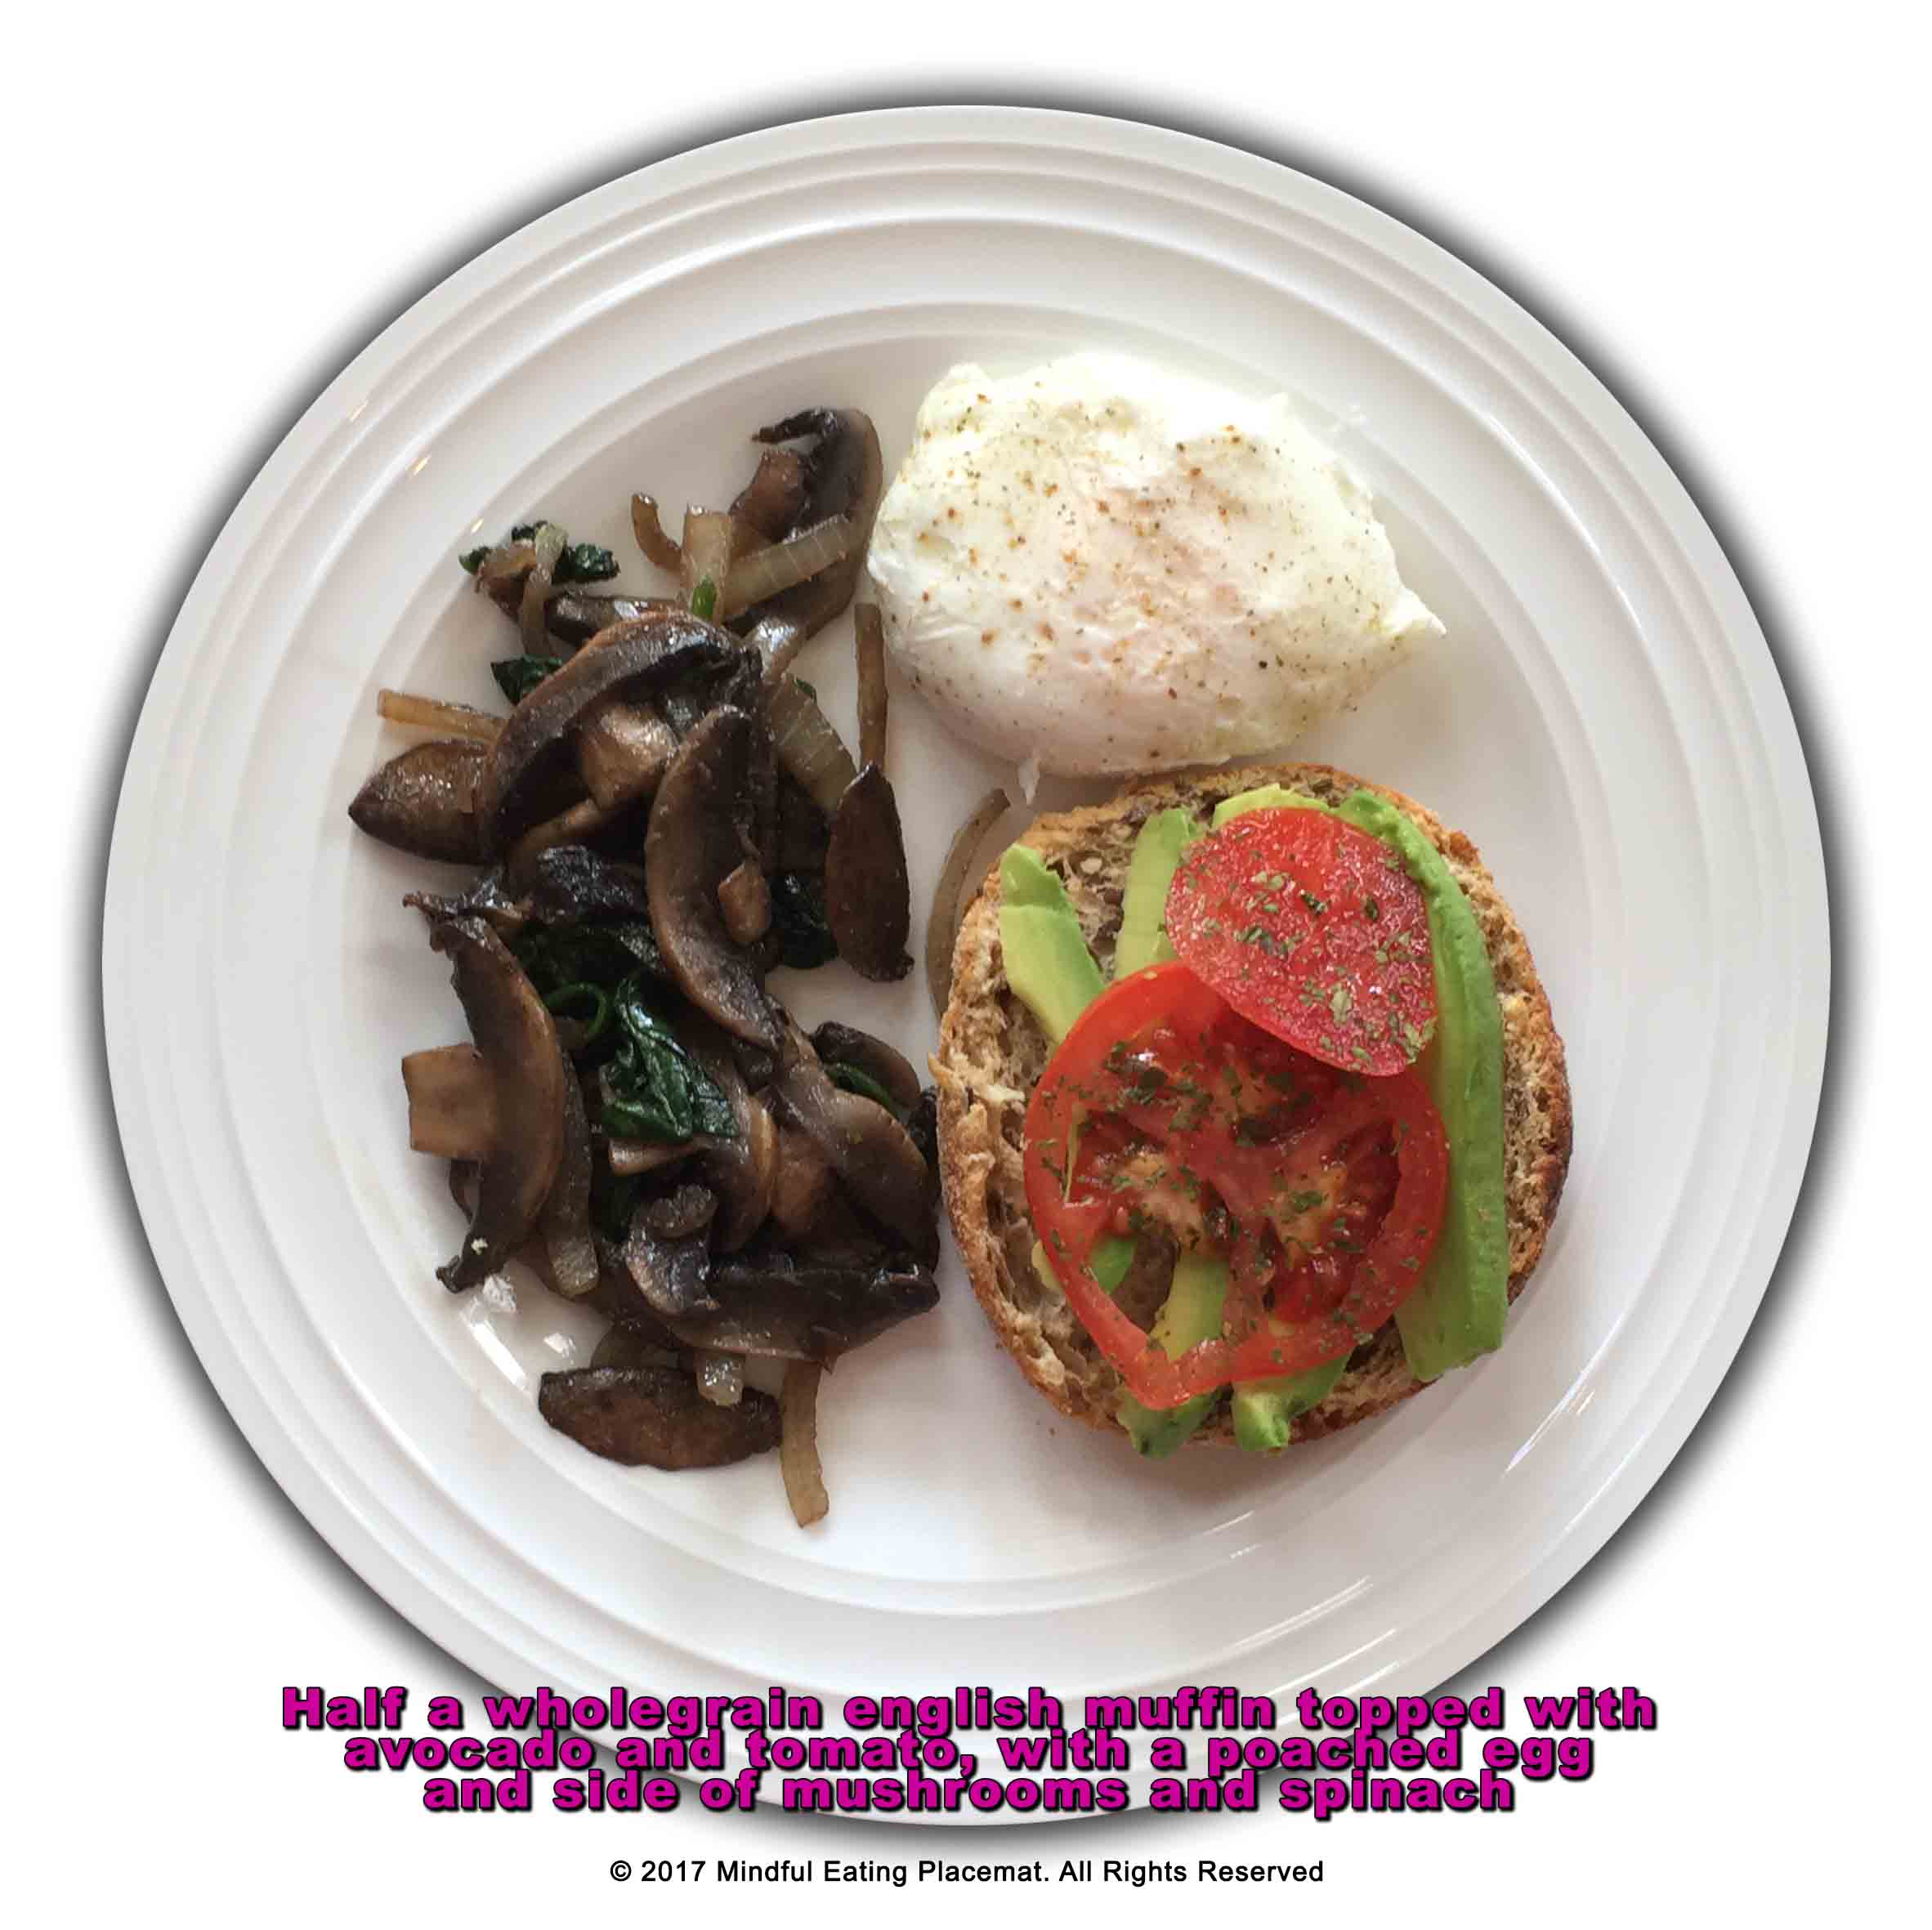 Wholemeal english muffin with avocado, tomato, poached egg, mushrooms and spinach